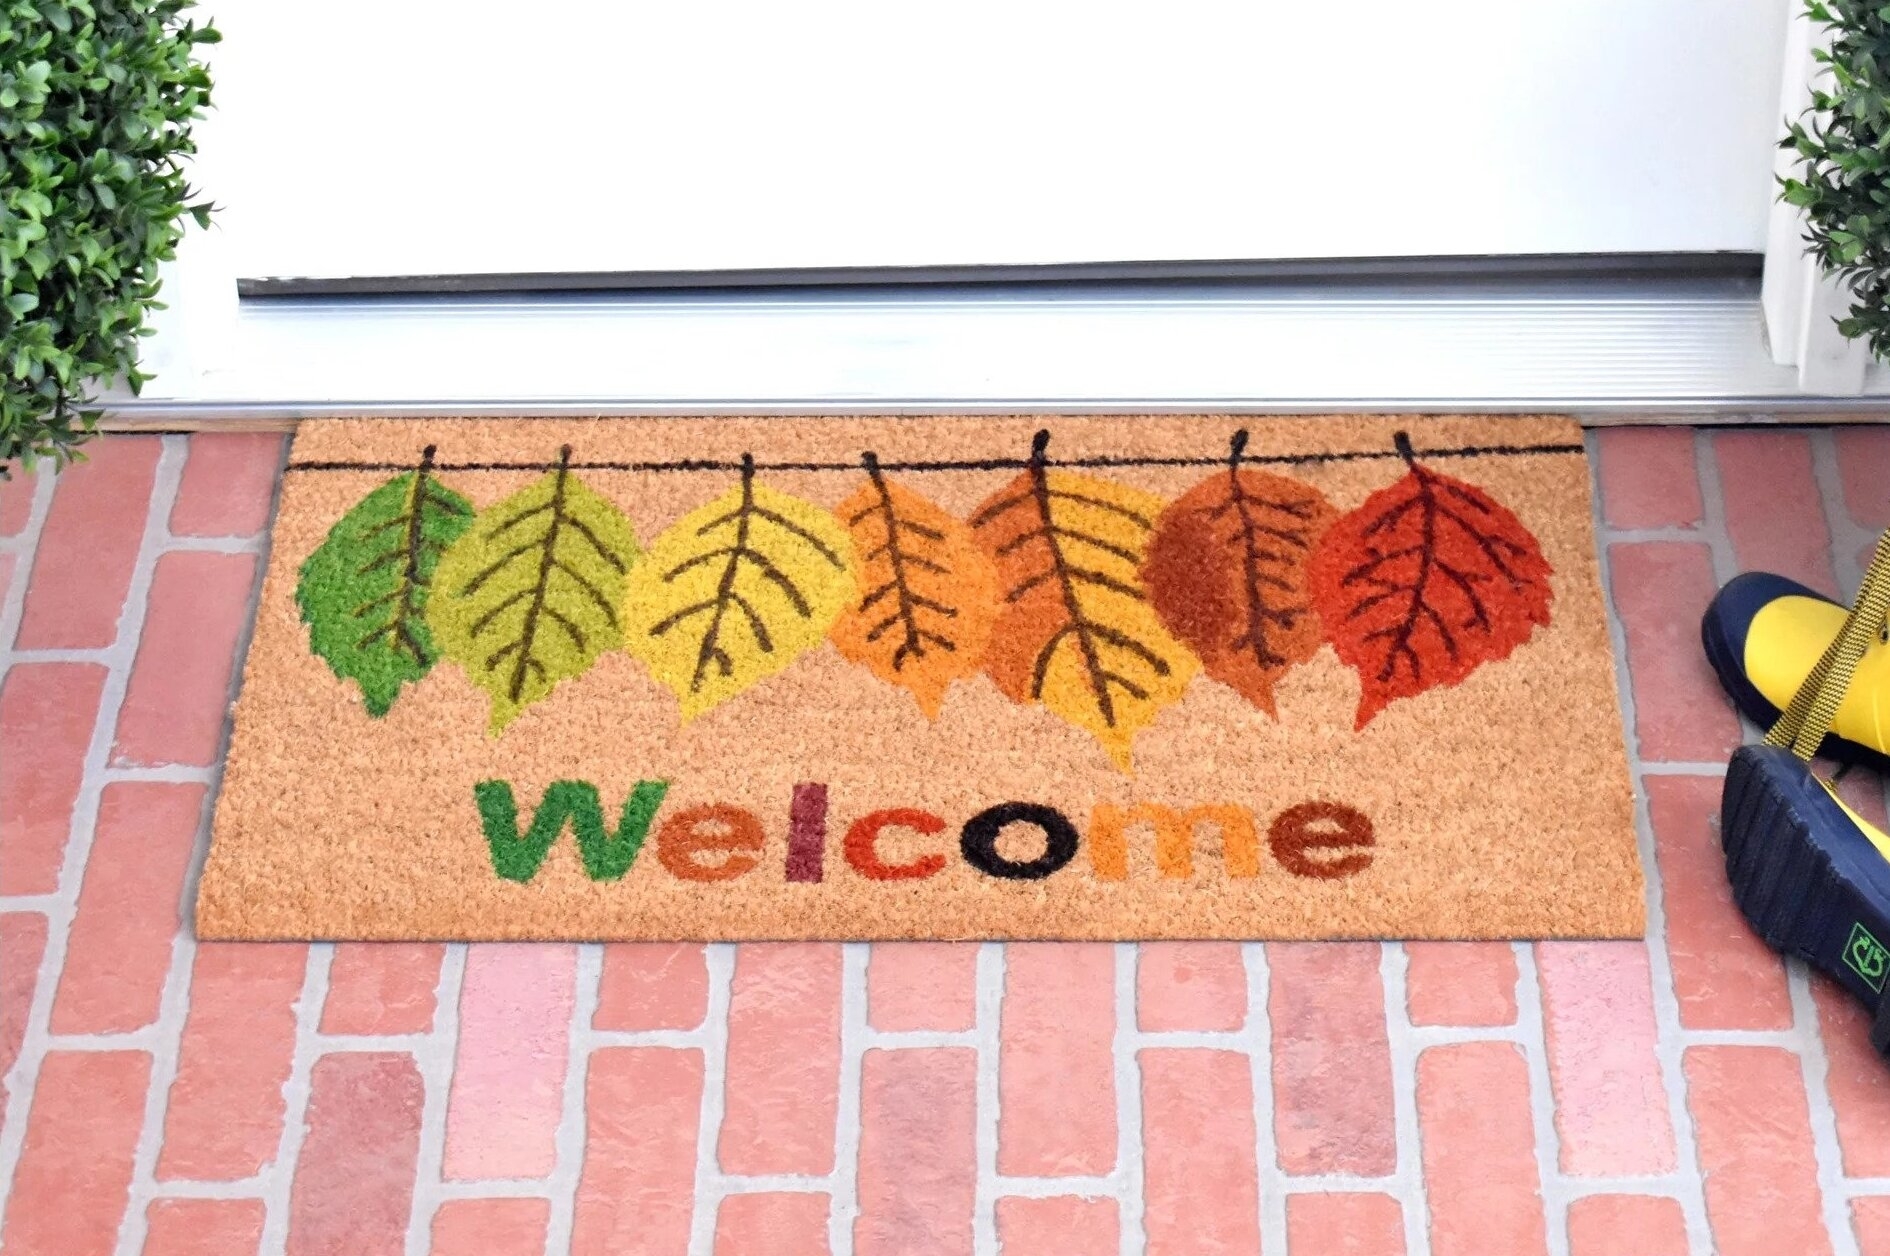 The doormat, which reads &quot;welcome&quot; and has leaves in various colors